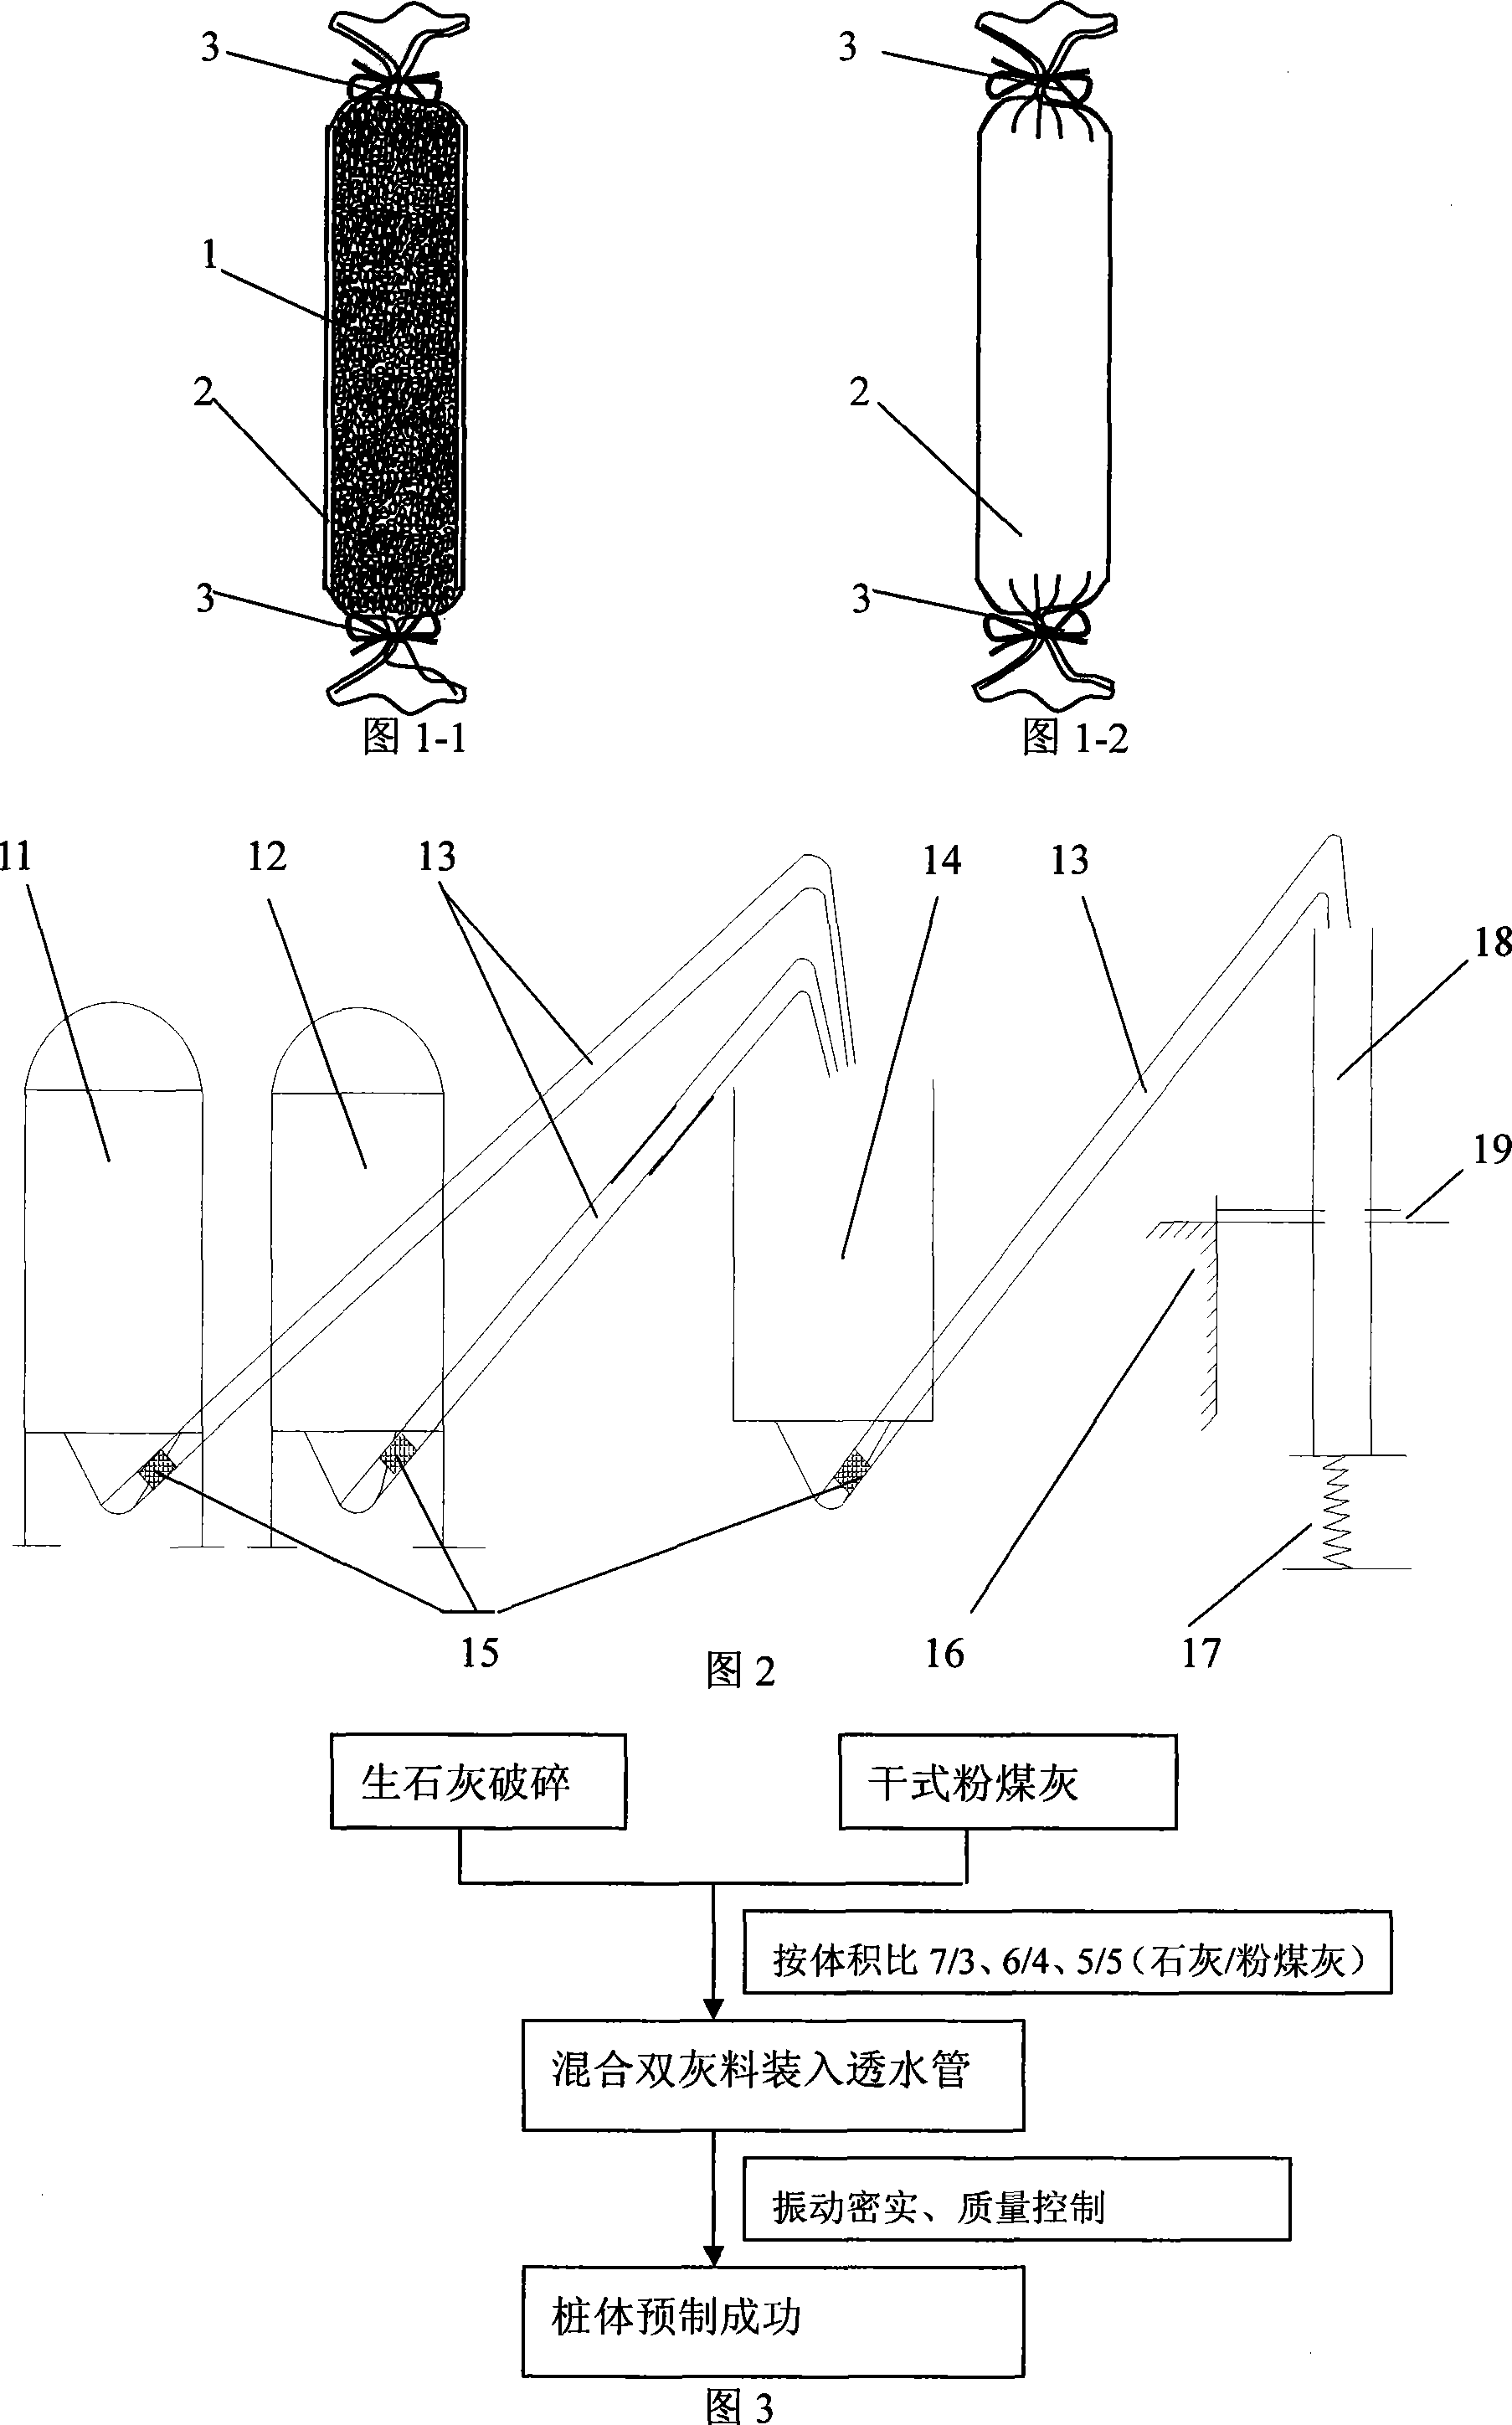 Lime coal ash precast pile and pile forming technique, and method for forming composite ground foundation